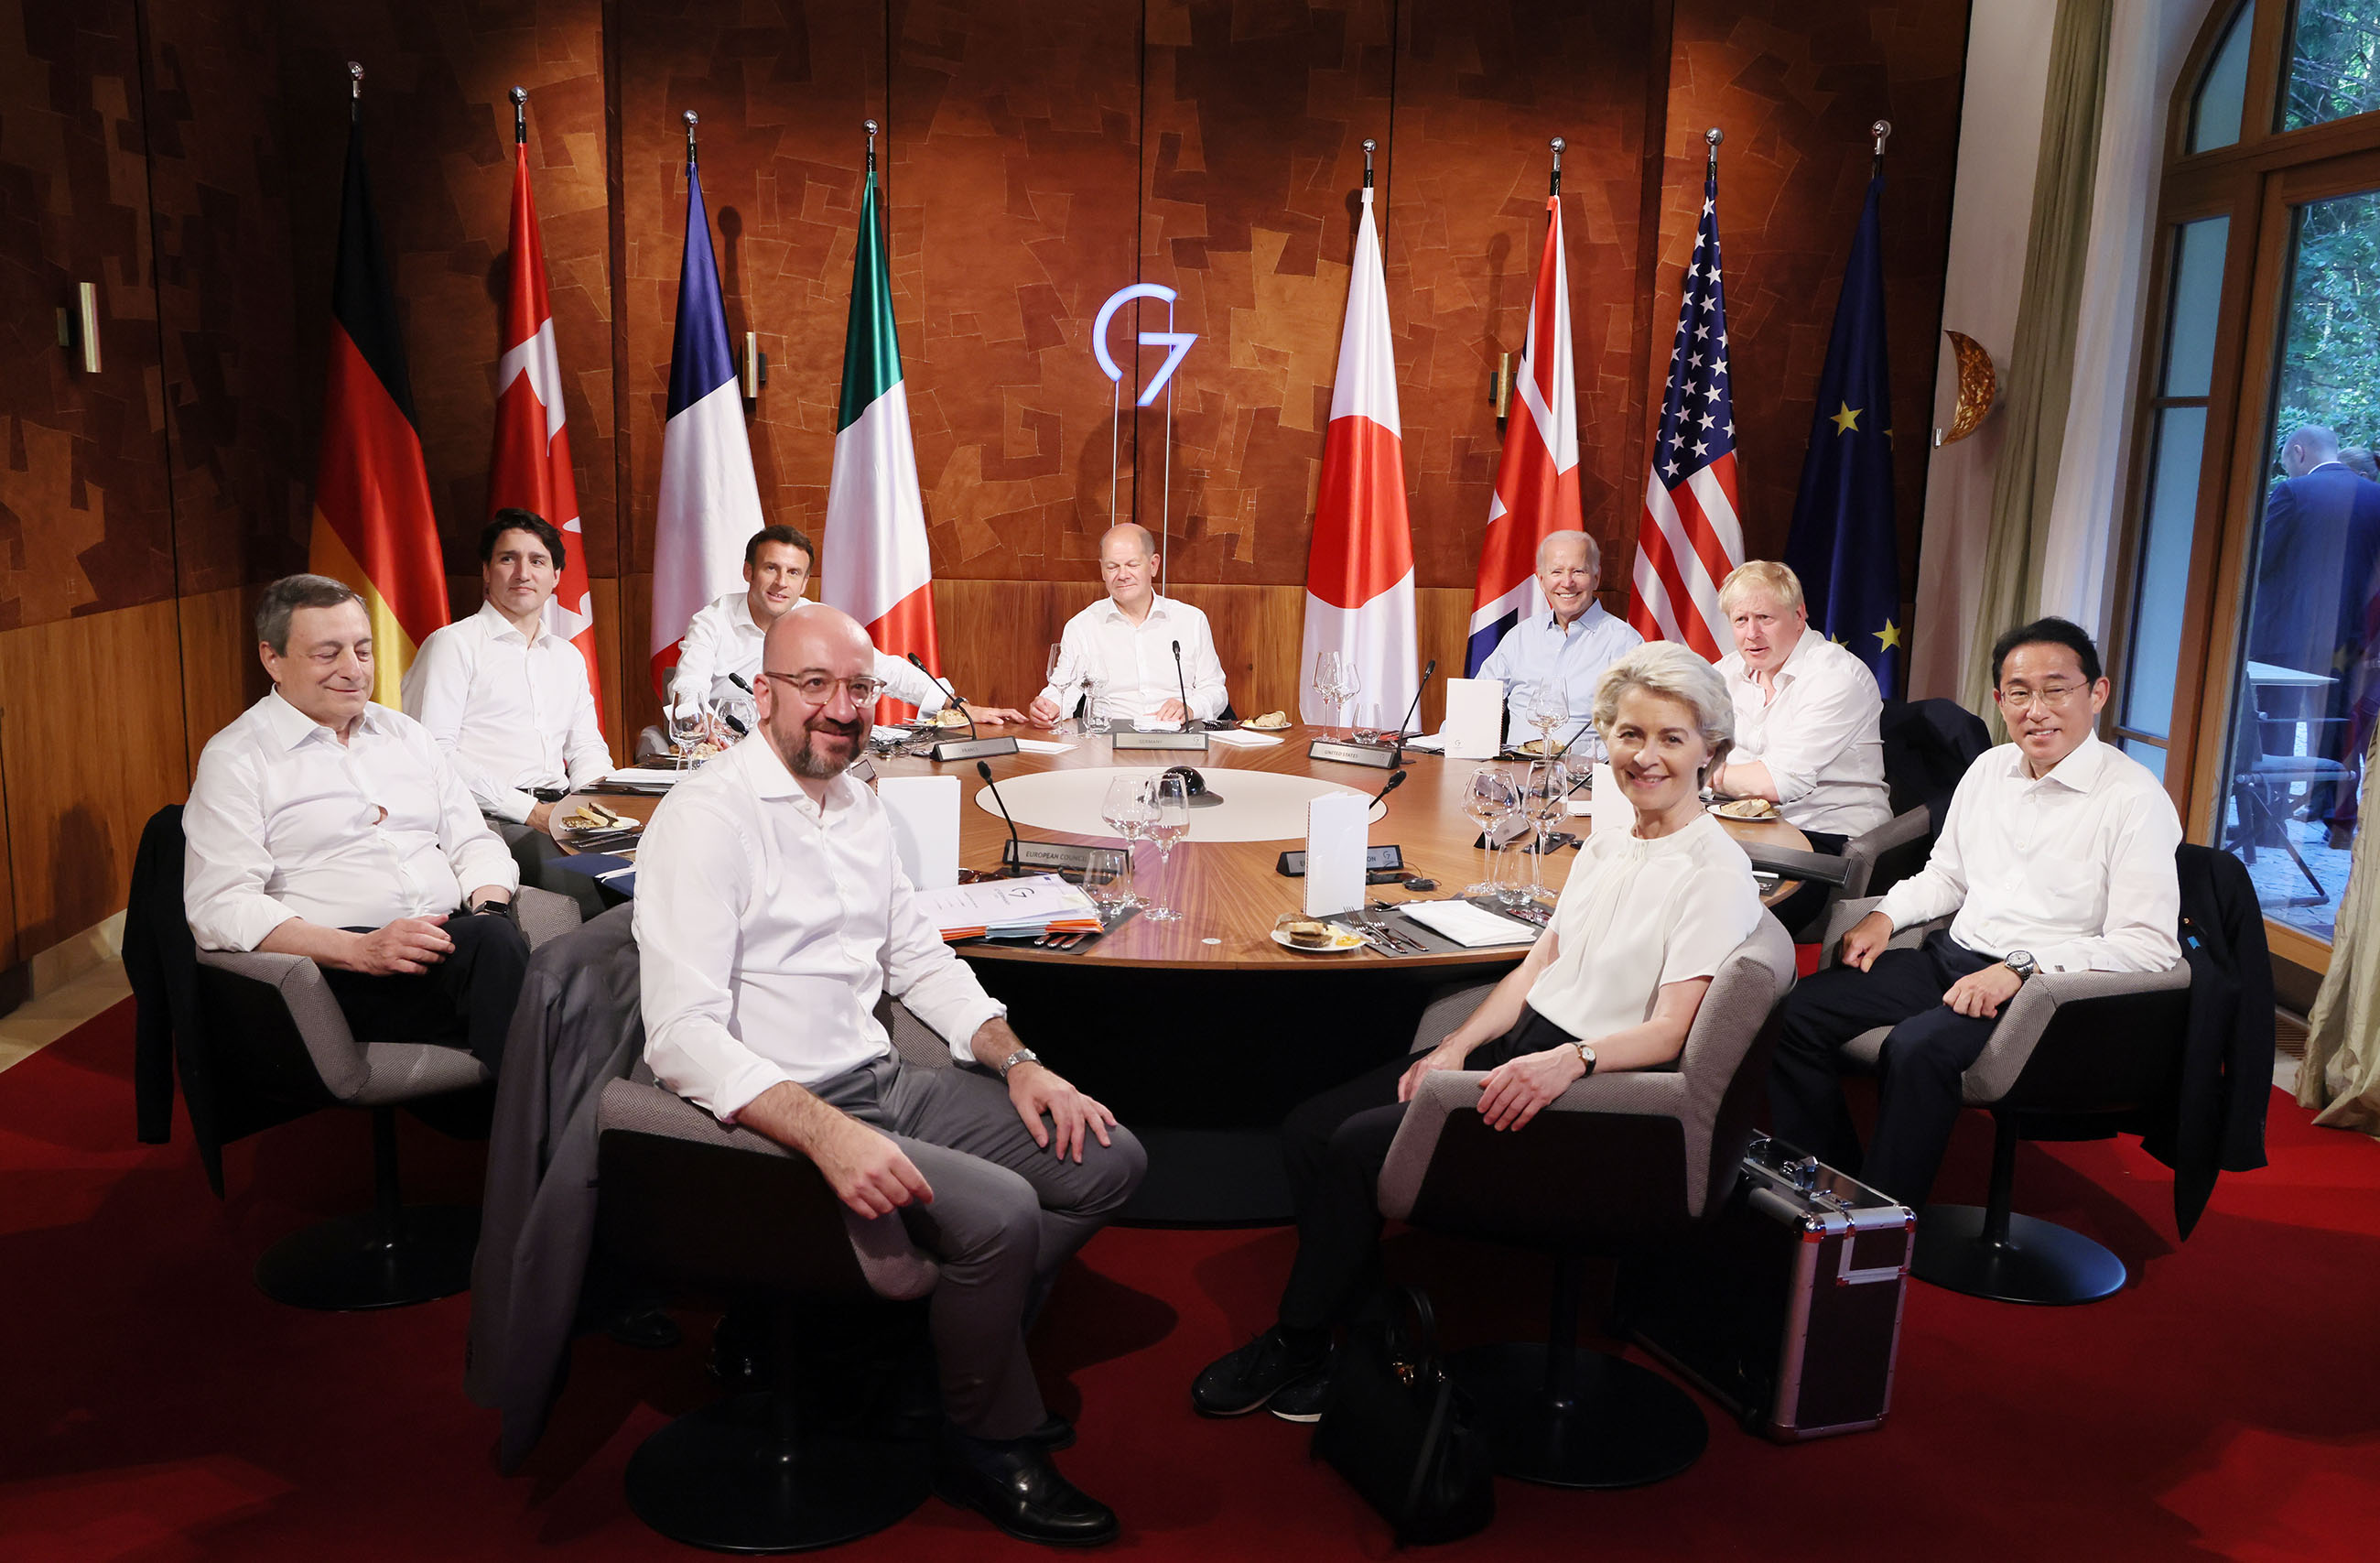 Photograph of a working dinner on diplomacy and security